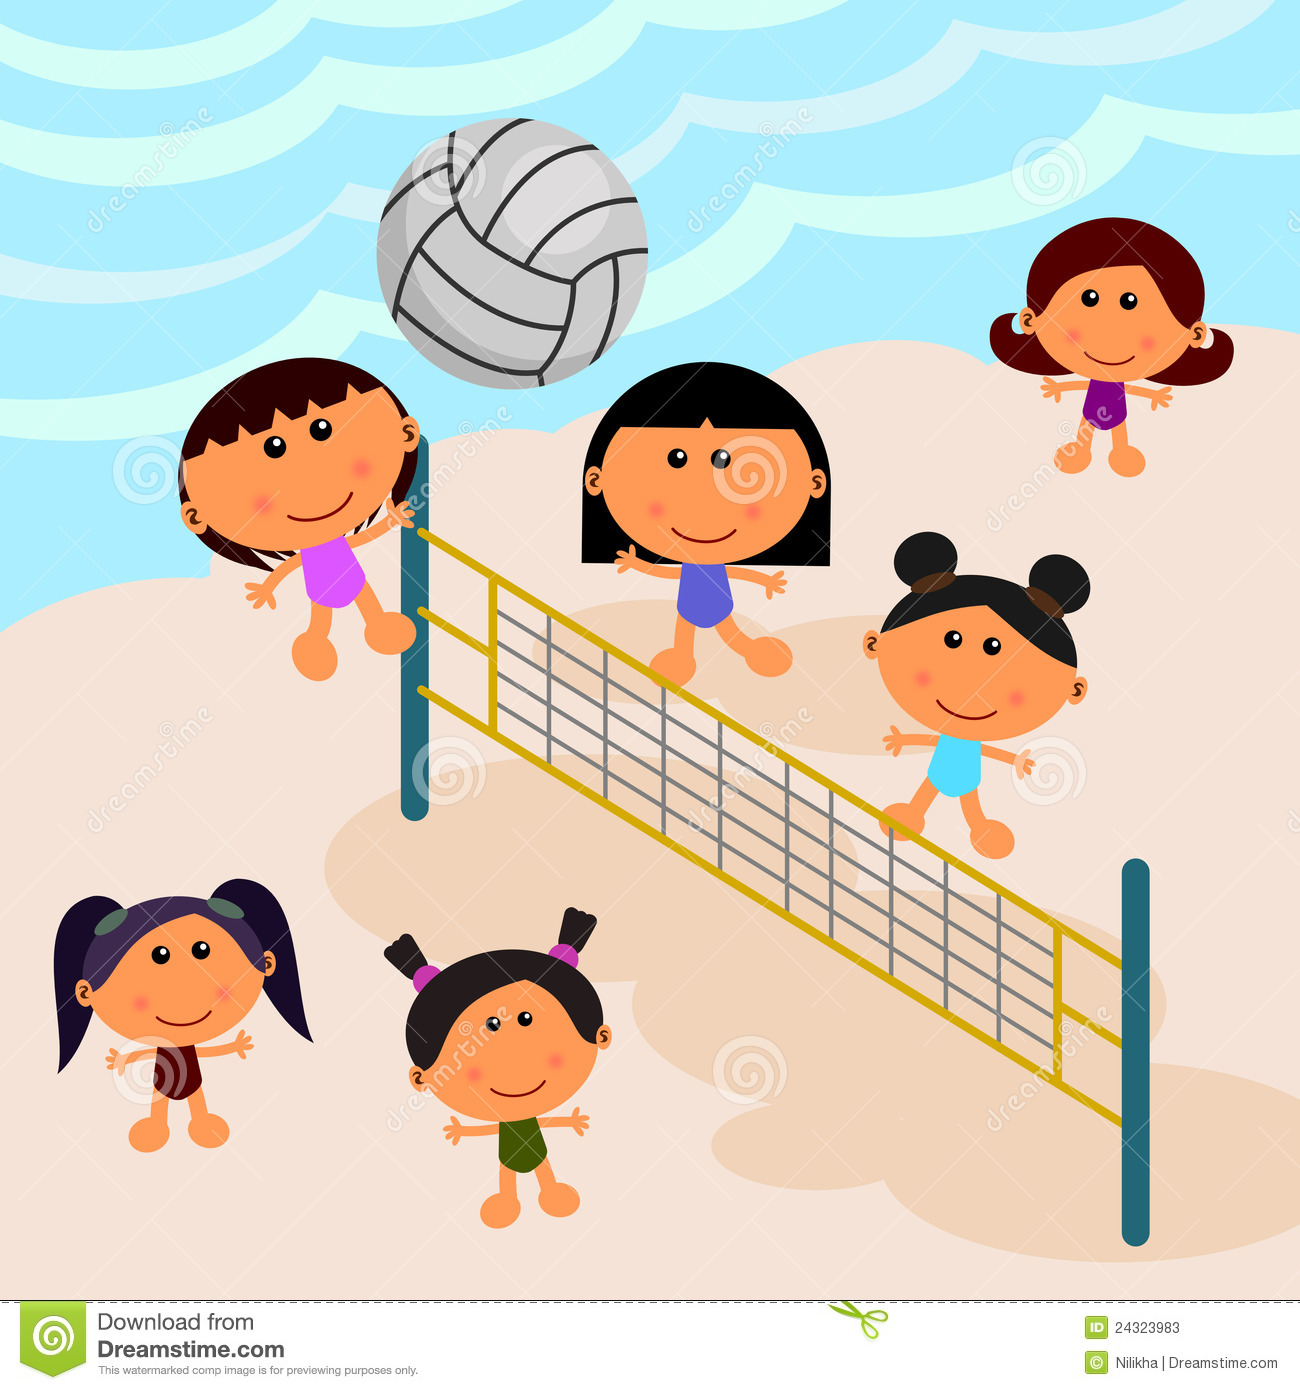 Scene Composed Of A Group Of Cute Cartoon Kids Playing Volleyball